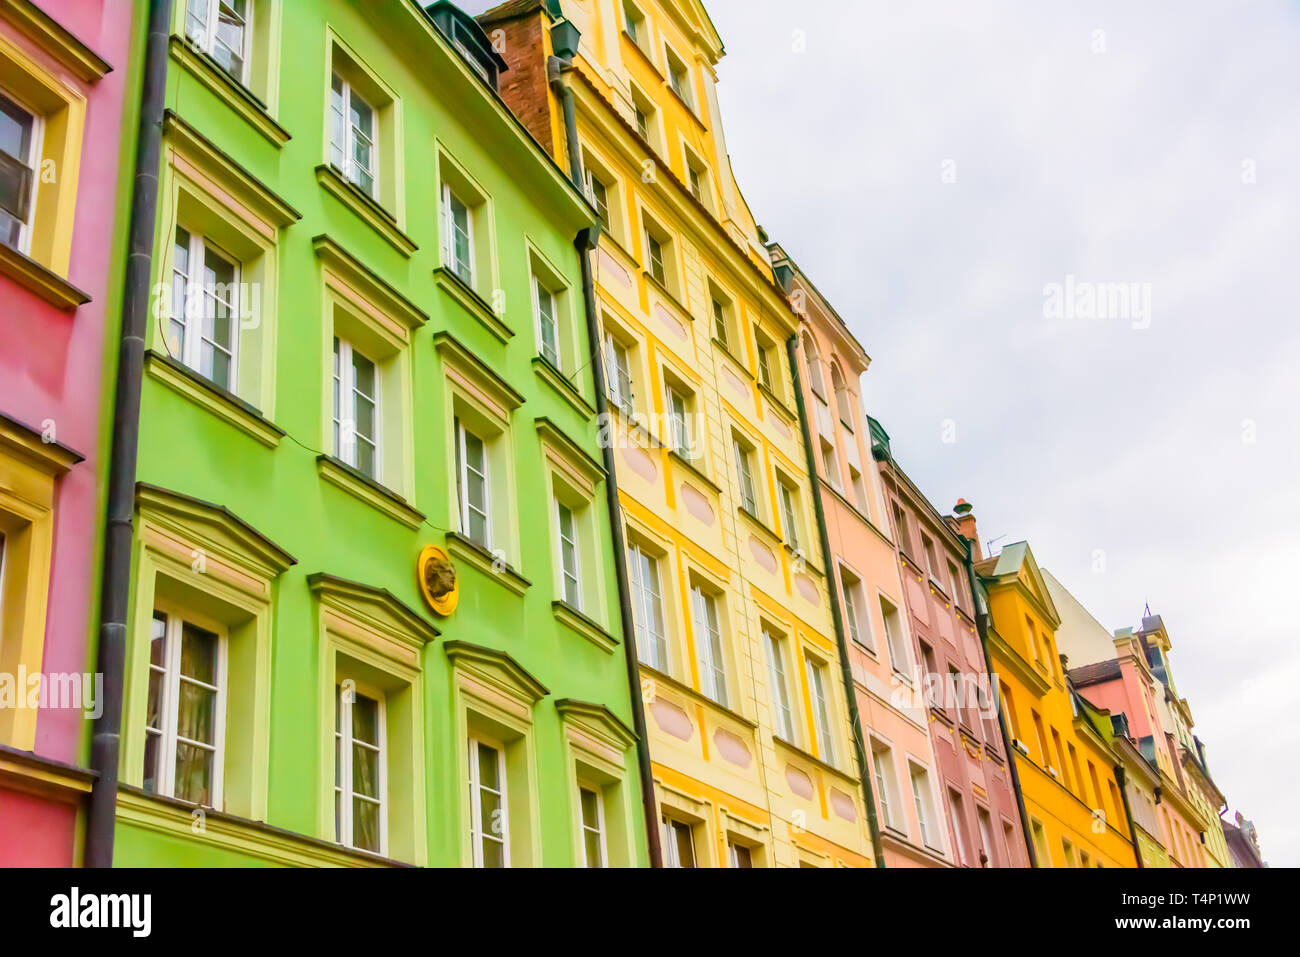 Colourful buildings within the town city square, Rynek, Wrocław, Wroclaw, Wroklaw, Poland Stock Photo